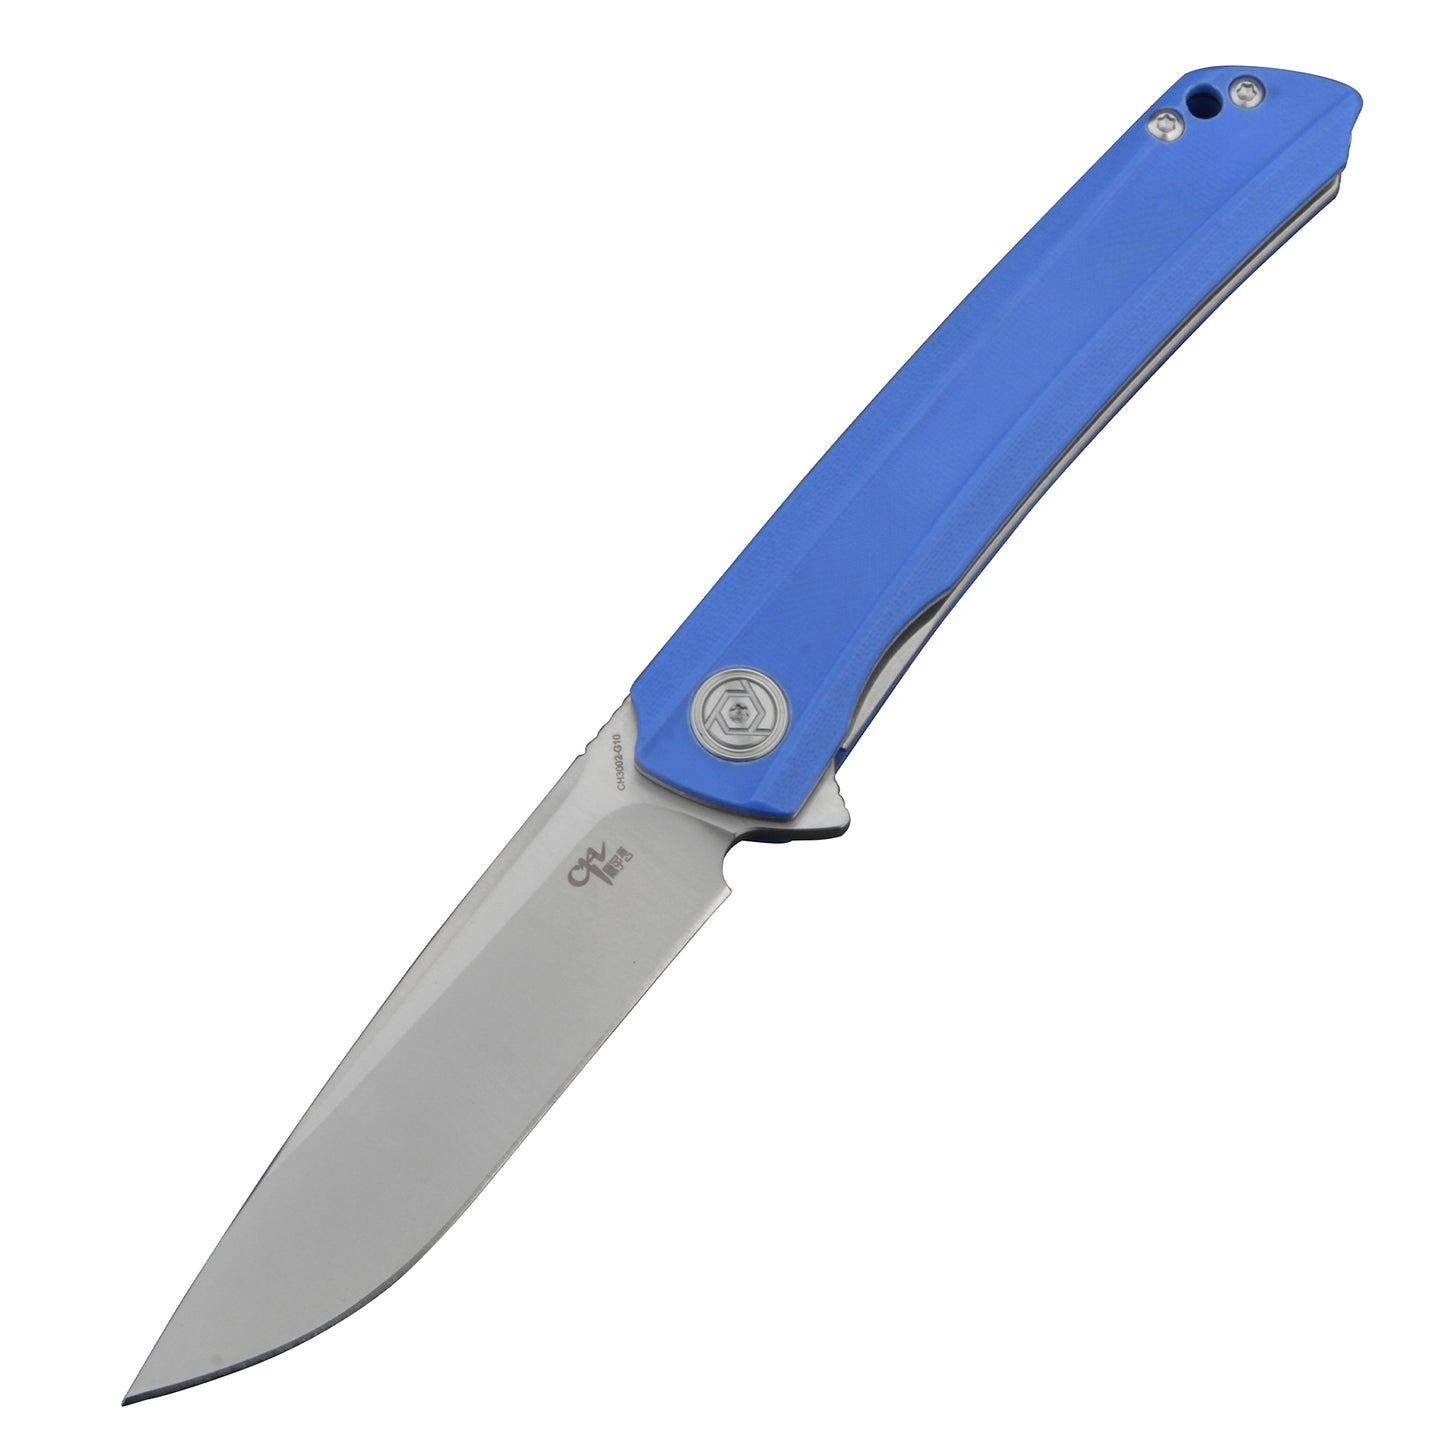 CH 3001 D2 G10 Handle Folding Knife IN STOCK